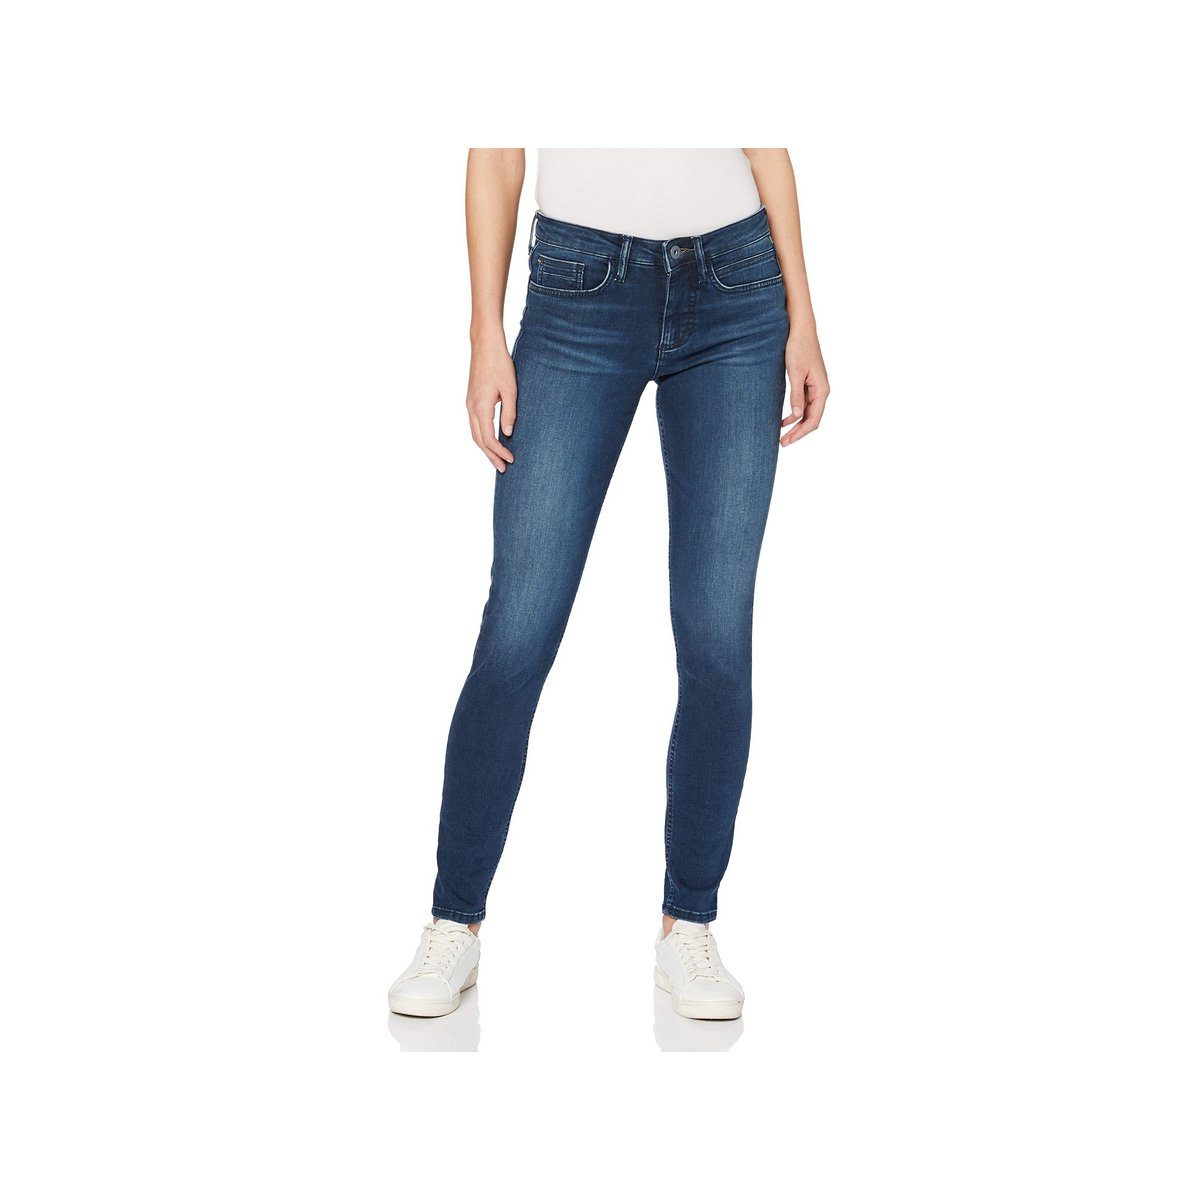 camel active Skinny-fit-Jeans hell-blau skinny fit (1-tlg)